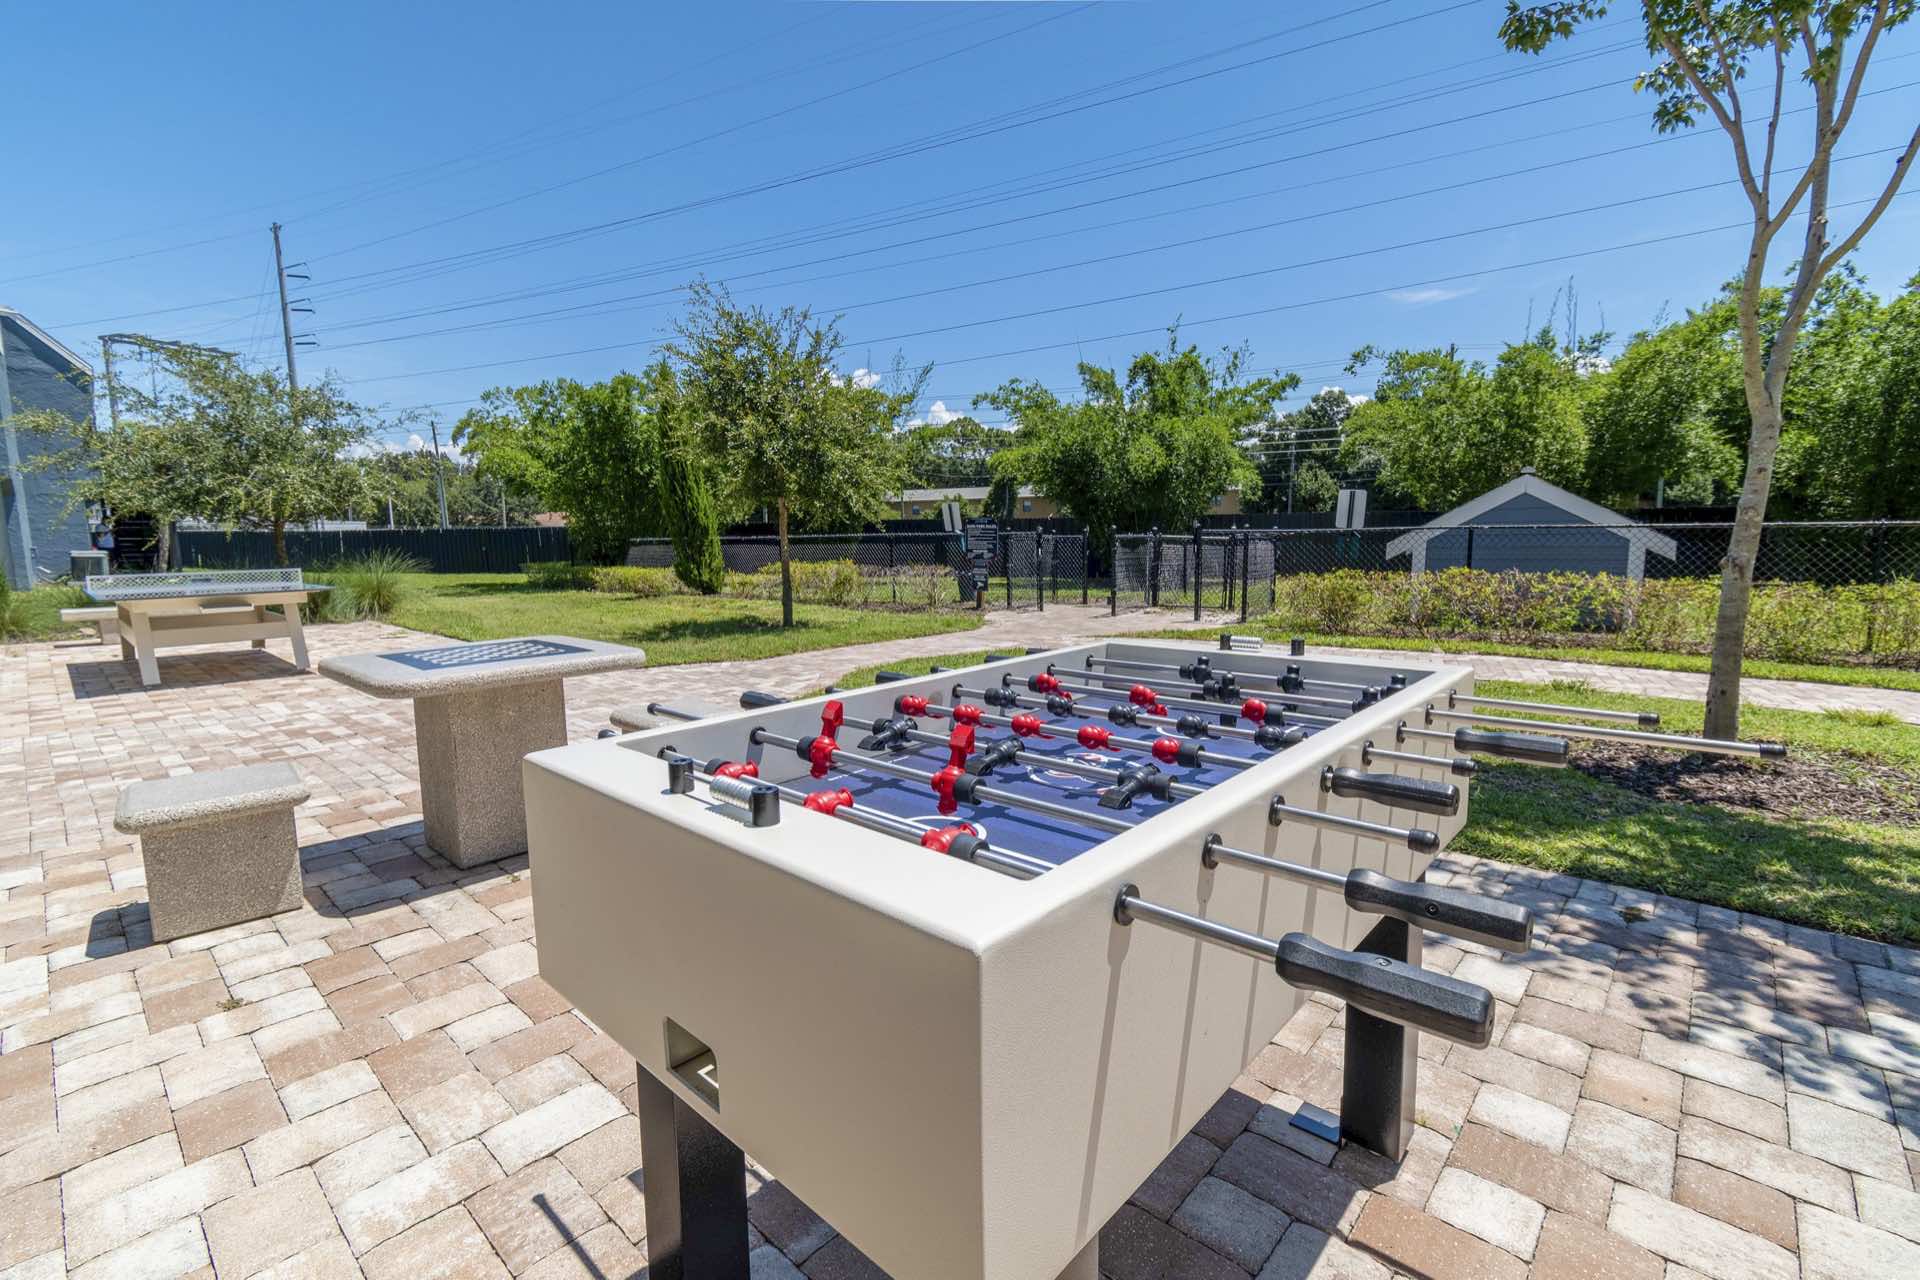 close-up photo of foosball table in outdoor game area